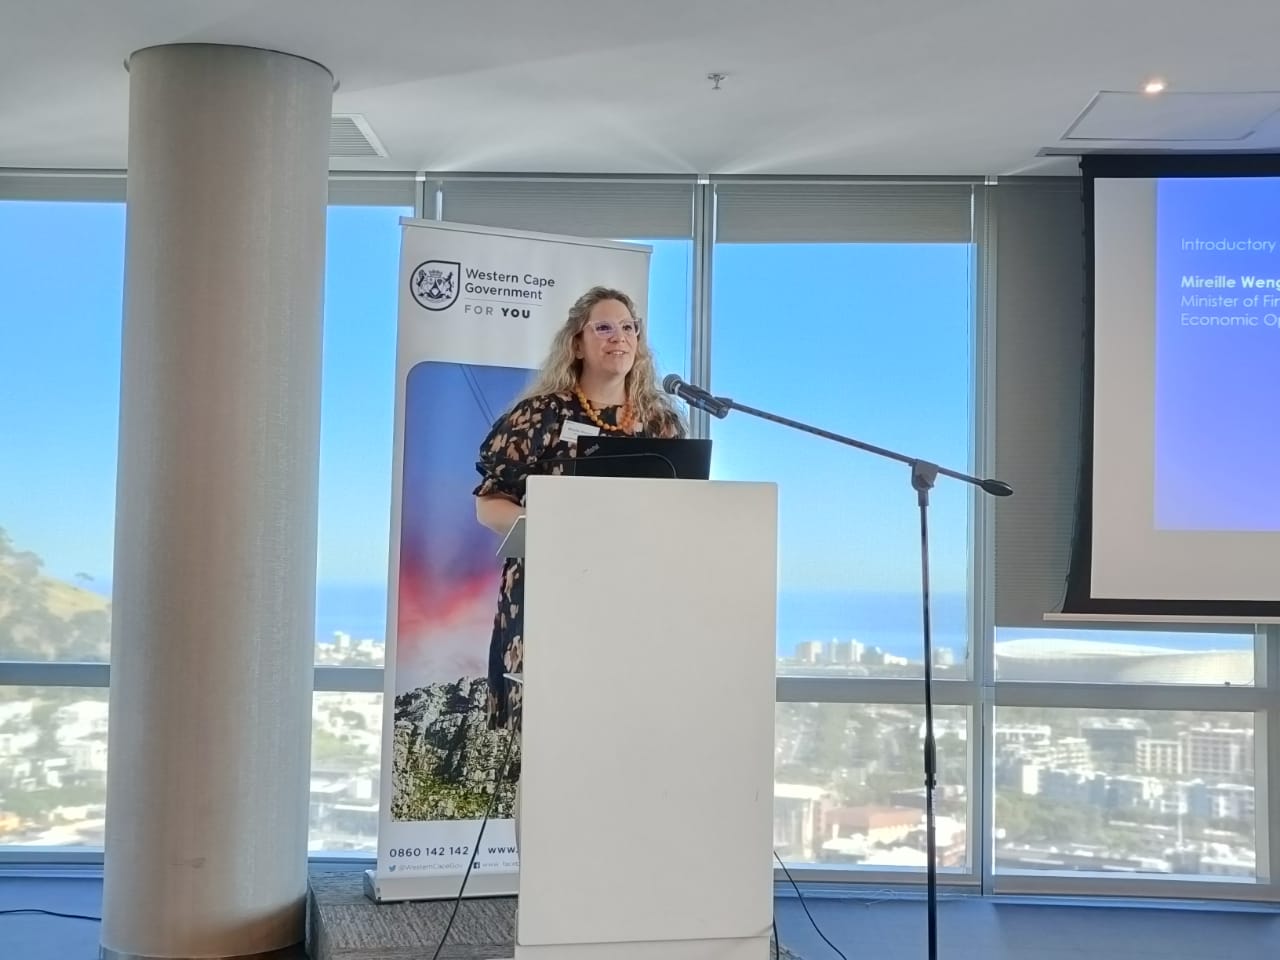 Minister of Finance and Economic Opportunities, Mireille Wenger, addressing the Tourism Readiness Dialogue